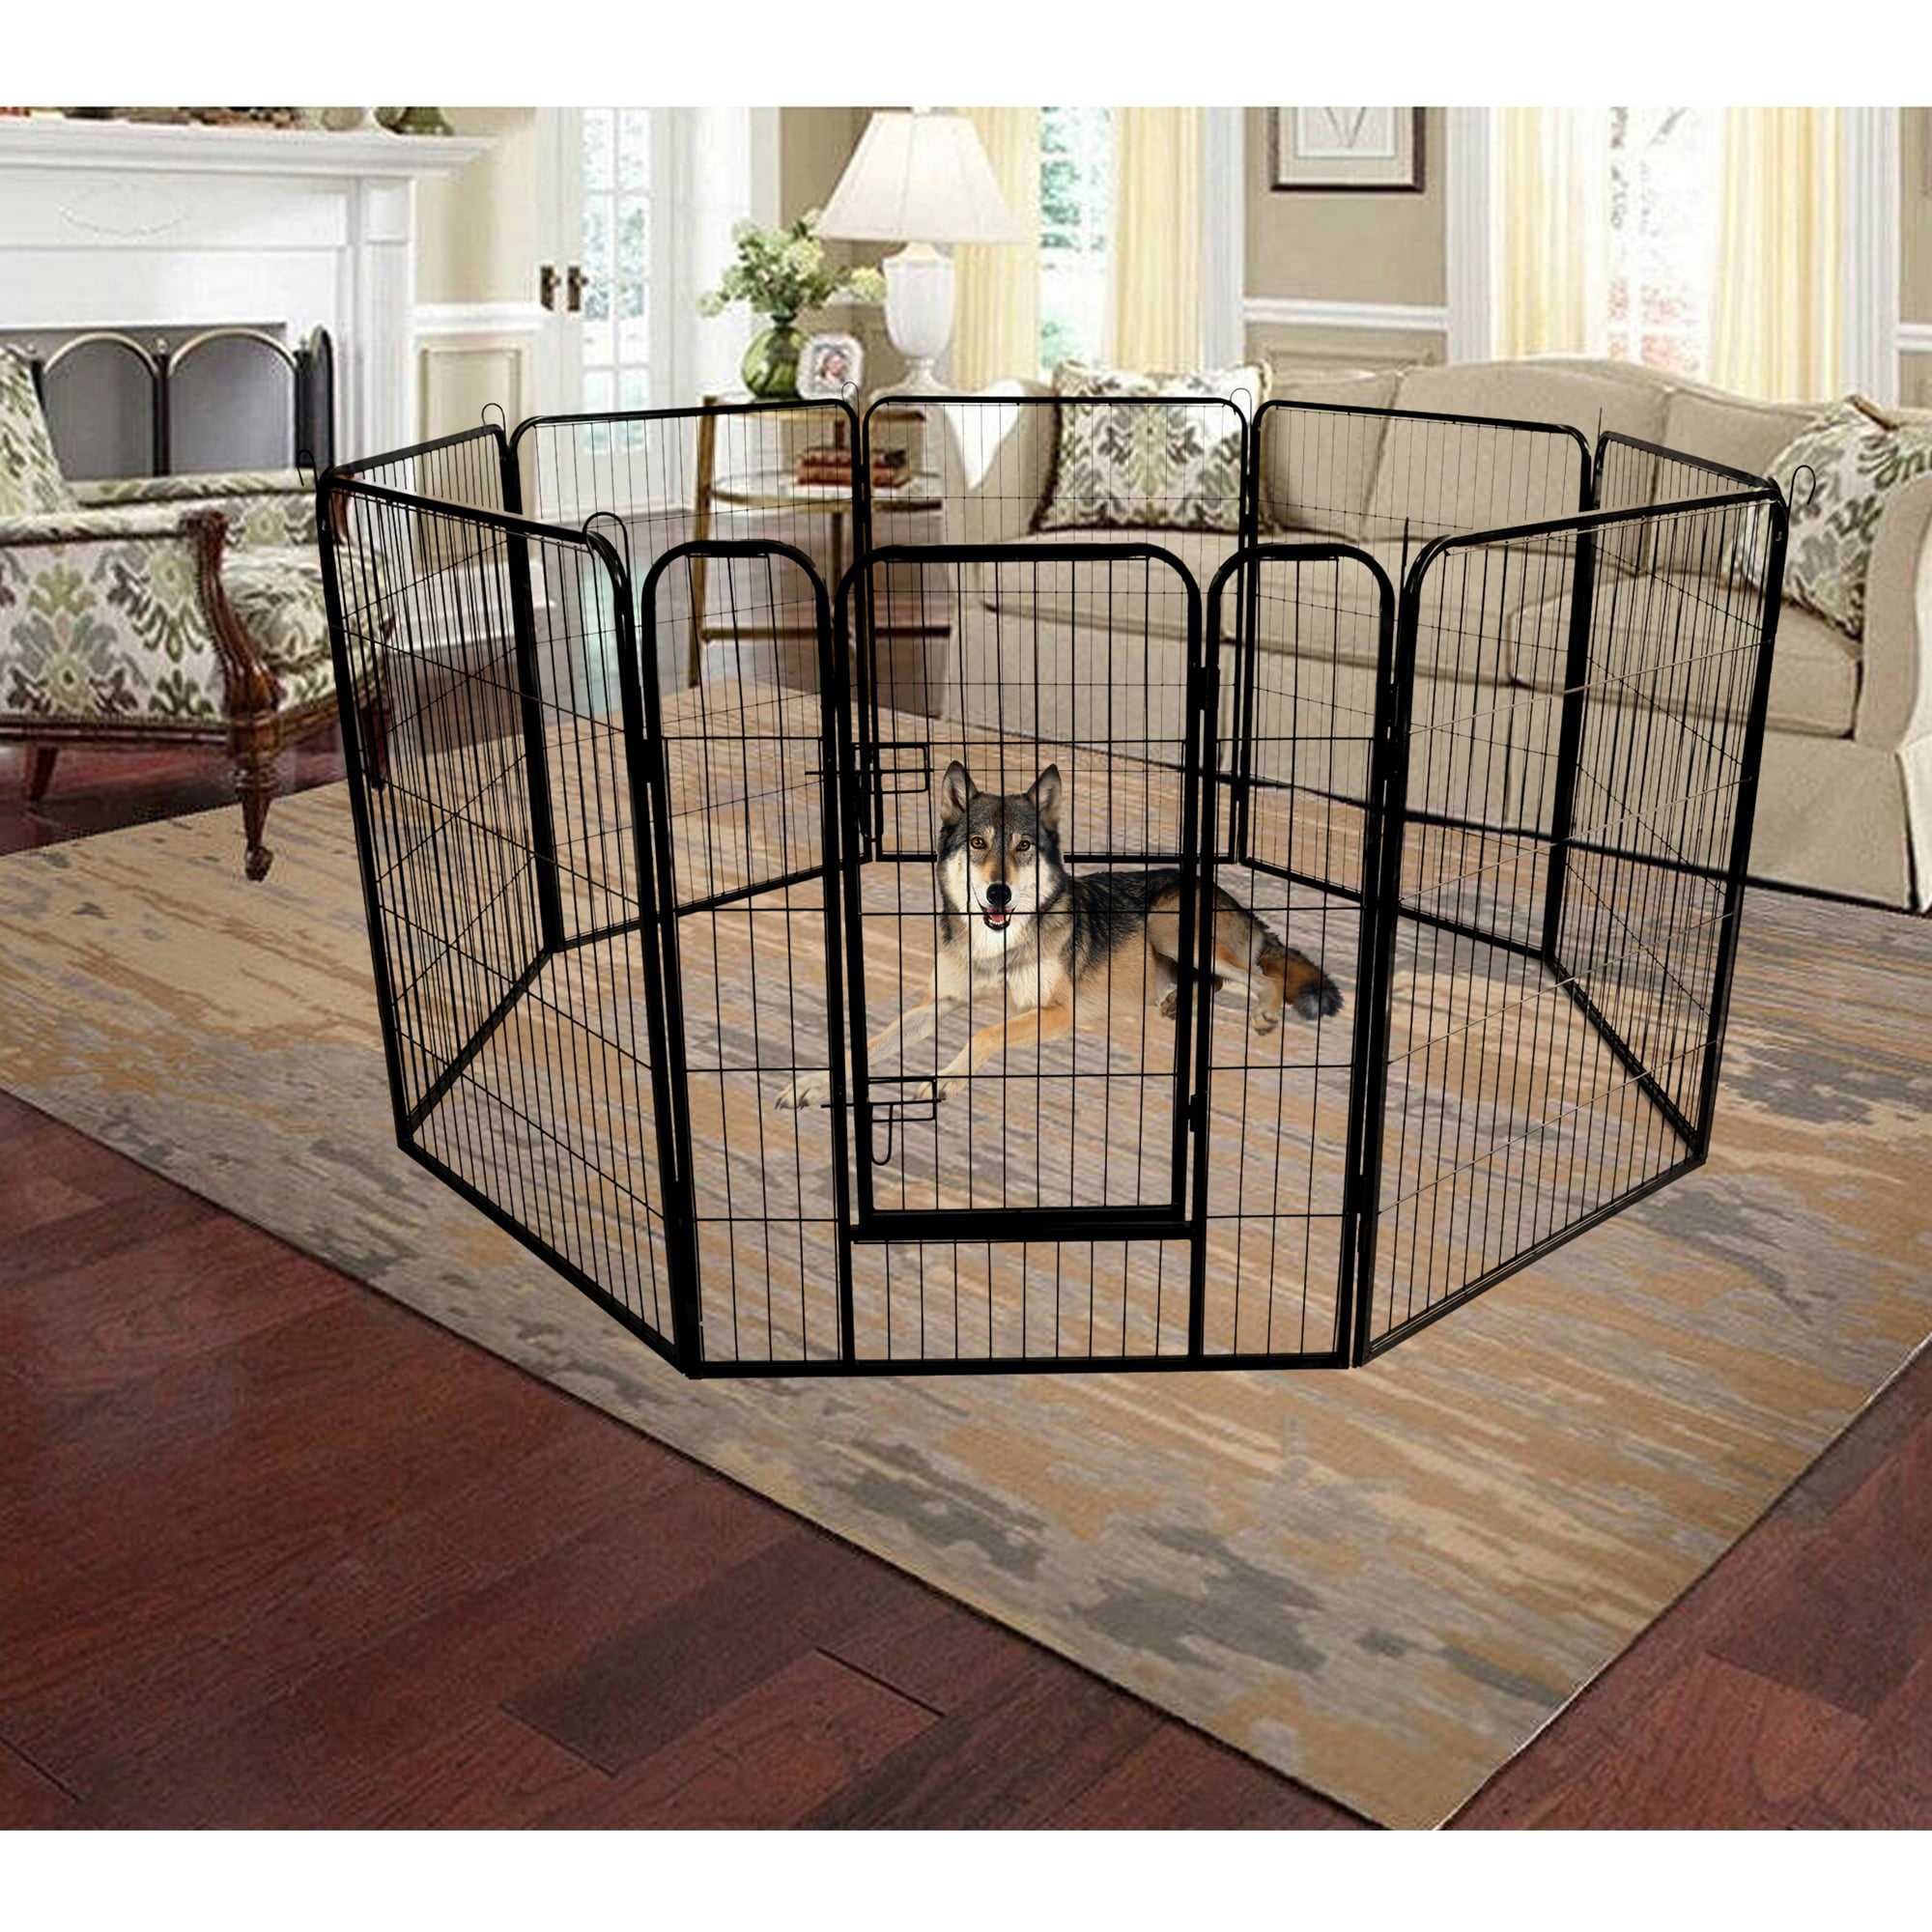 Outdoor cat large kennel dog pet cage enclosure crate house run exercise playpen 